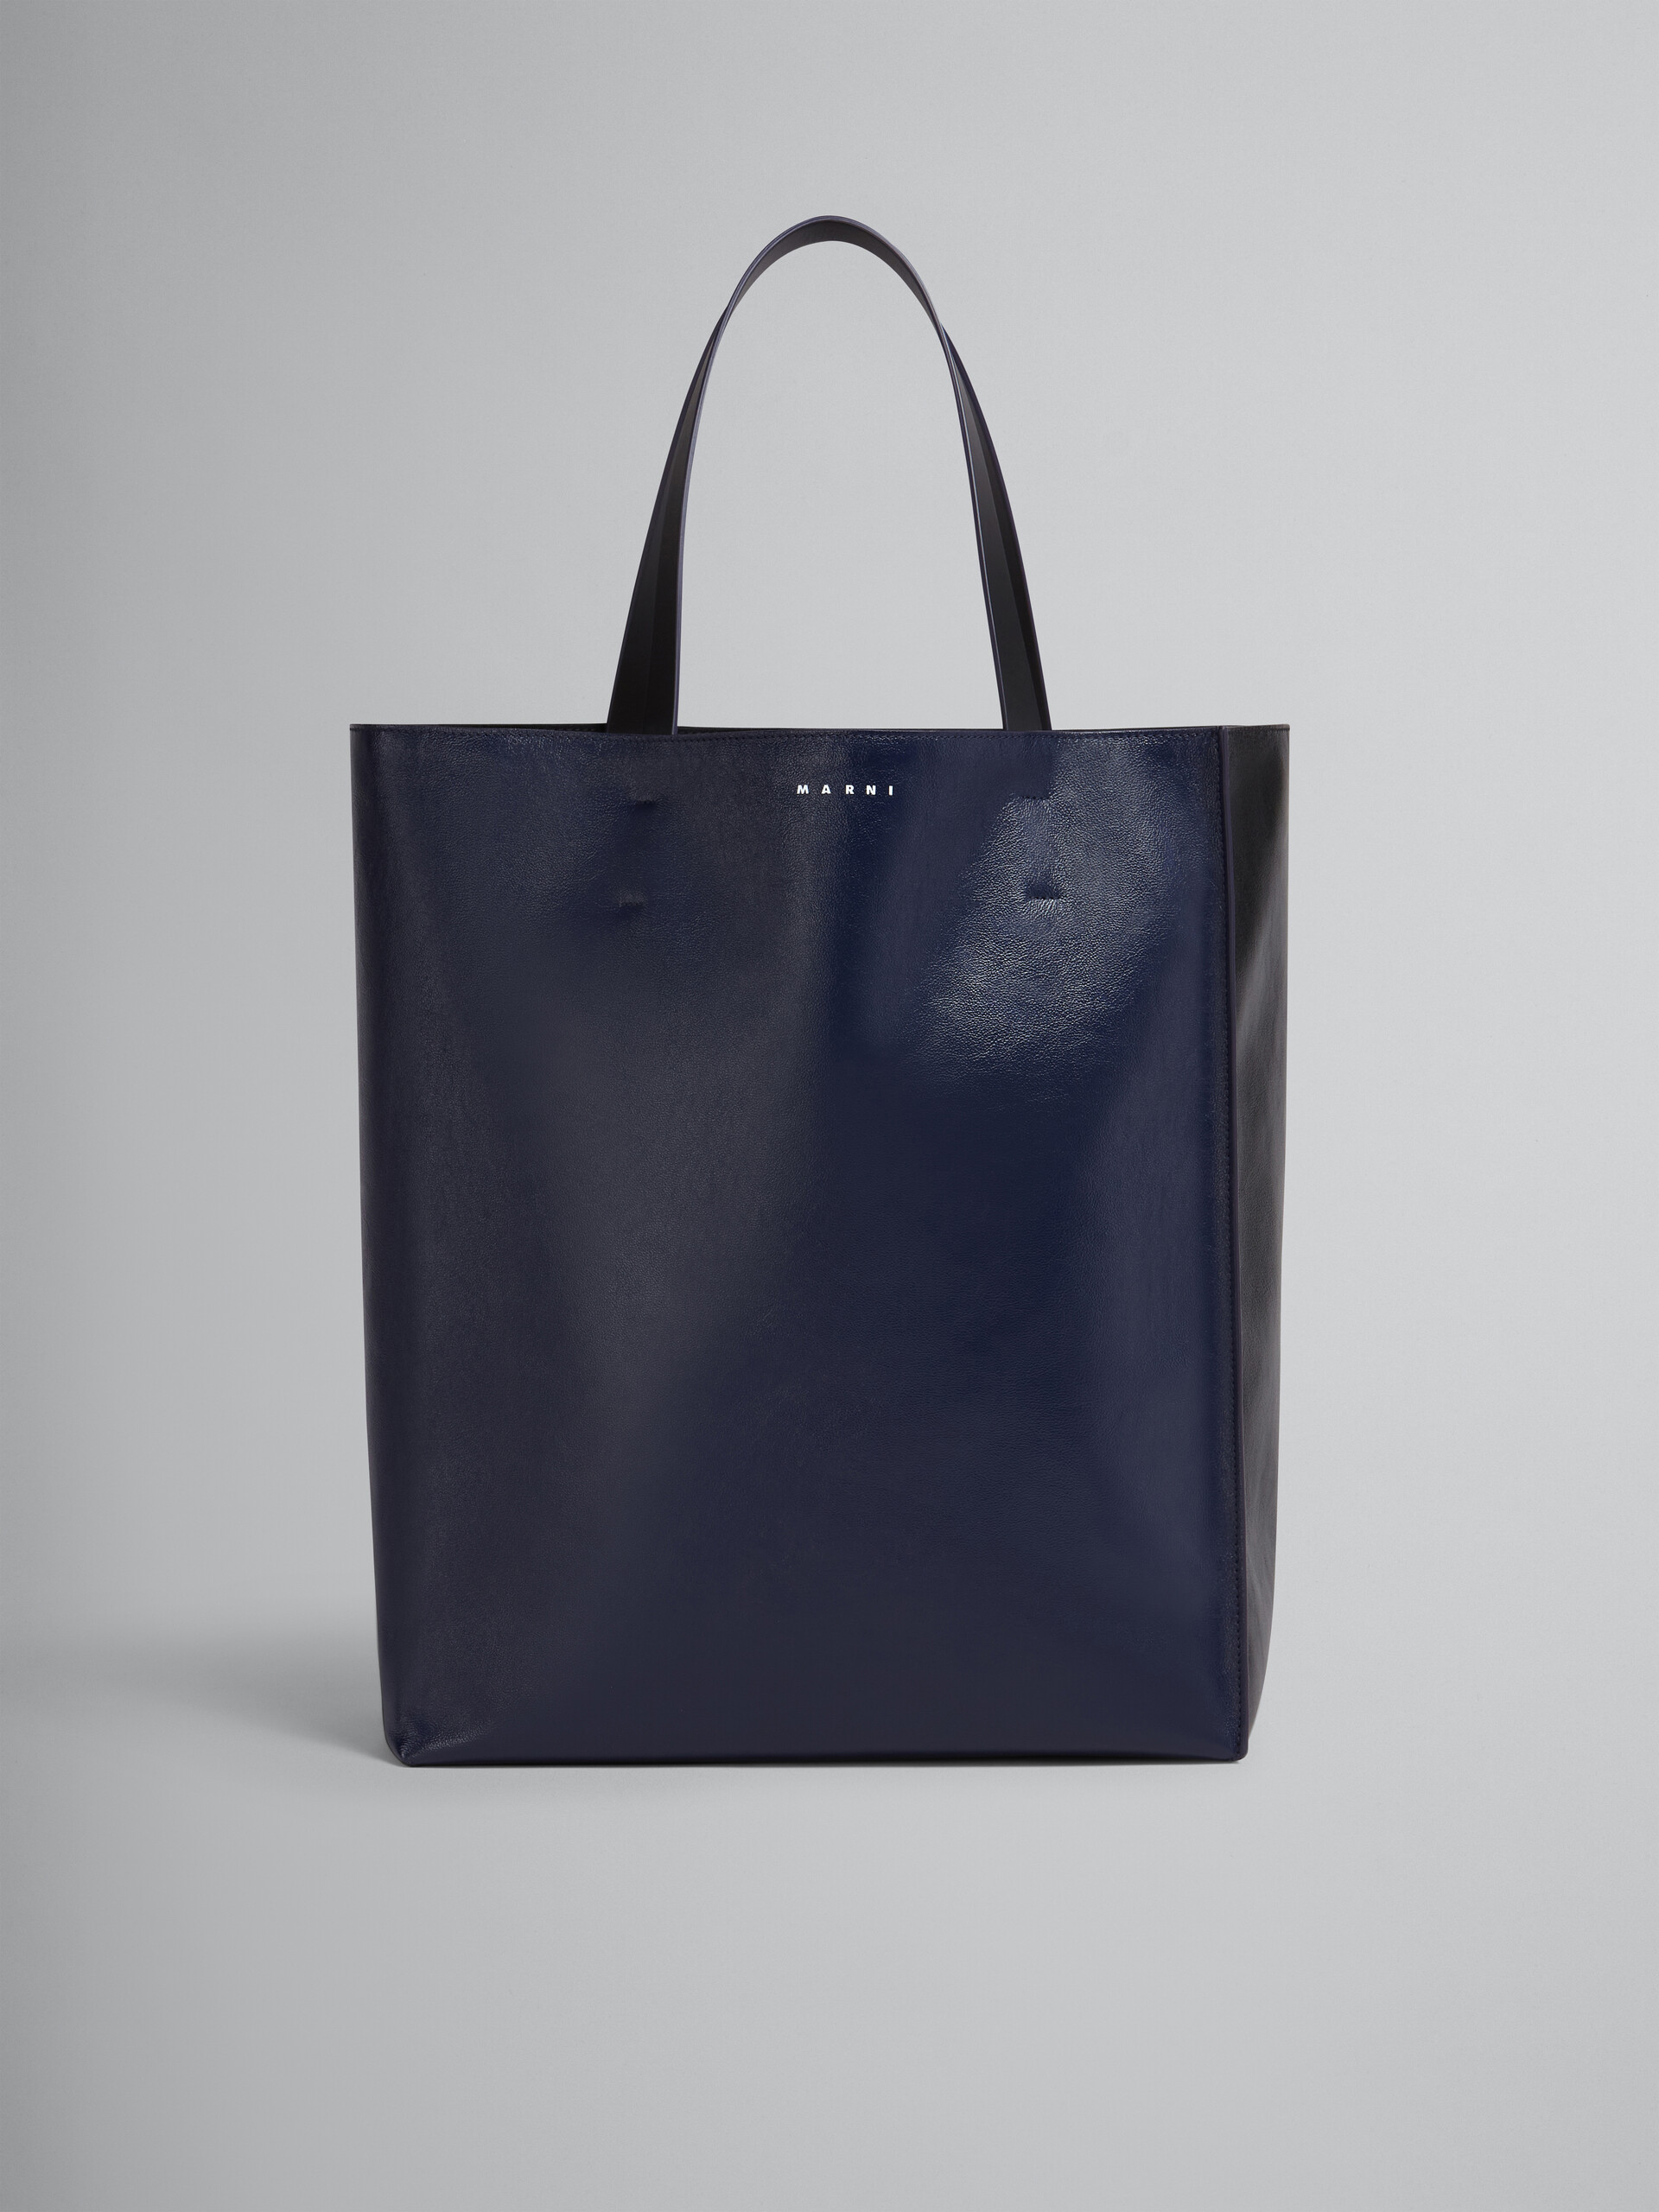 MUSEO SOFT large bag in blue and black shiny leather - Shopping Bags - Image 1